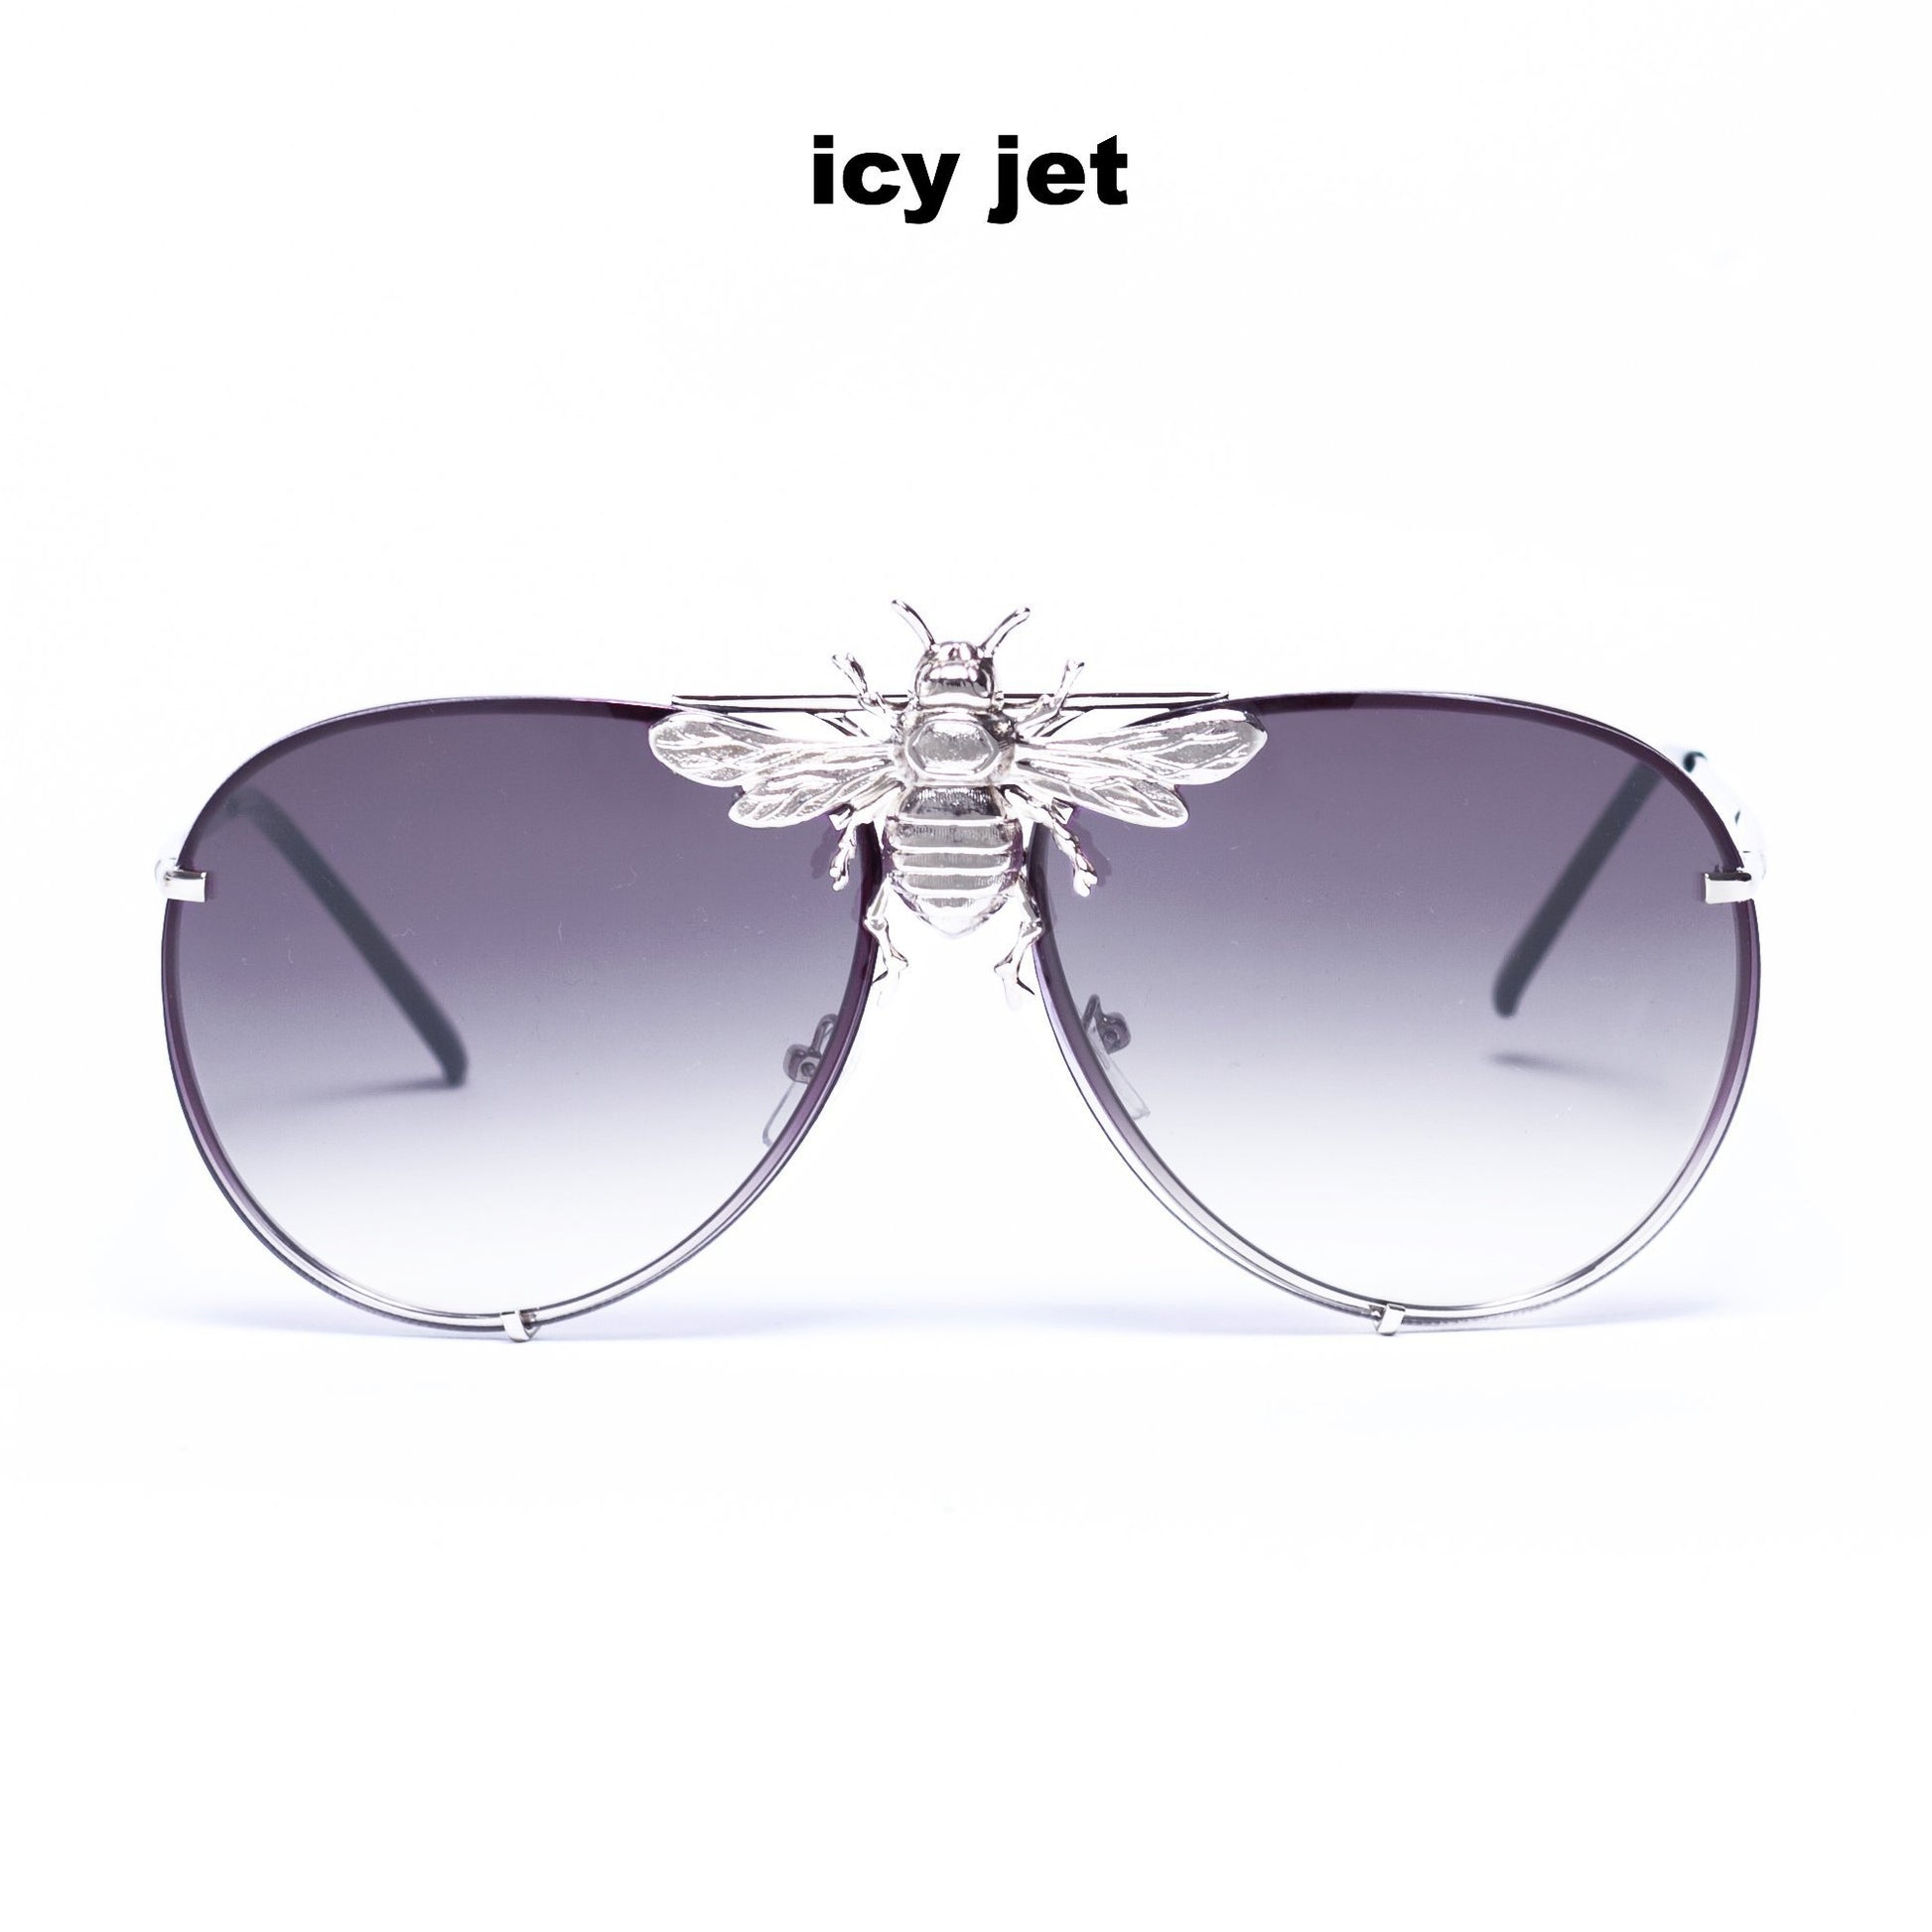 Snoop Dogg in the I’ll Be Rich Forever Bee Sunglasses in Jet Luxe Icy Jet - jet to gray lens SUNNIES + OPTICS Sunglasses Collection, Tnemnroda man- NRODA